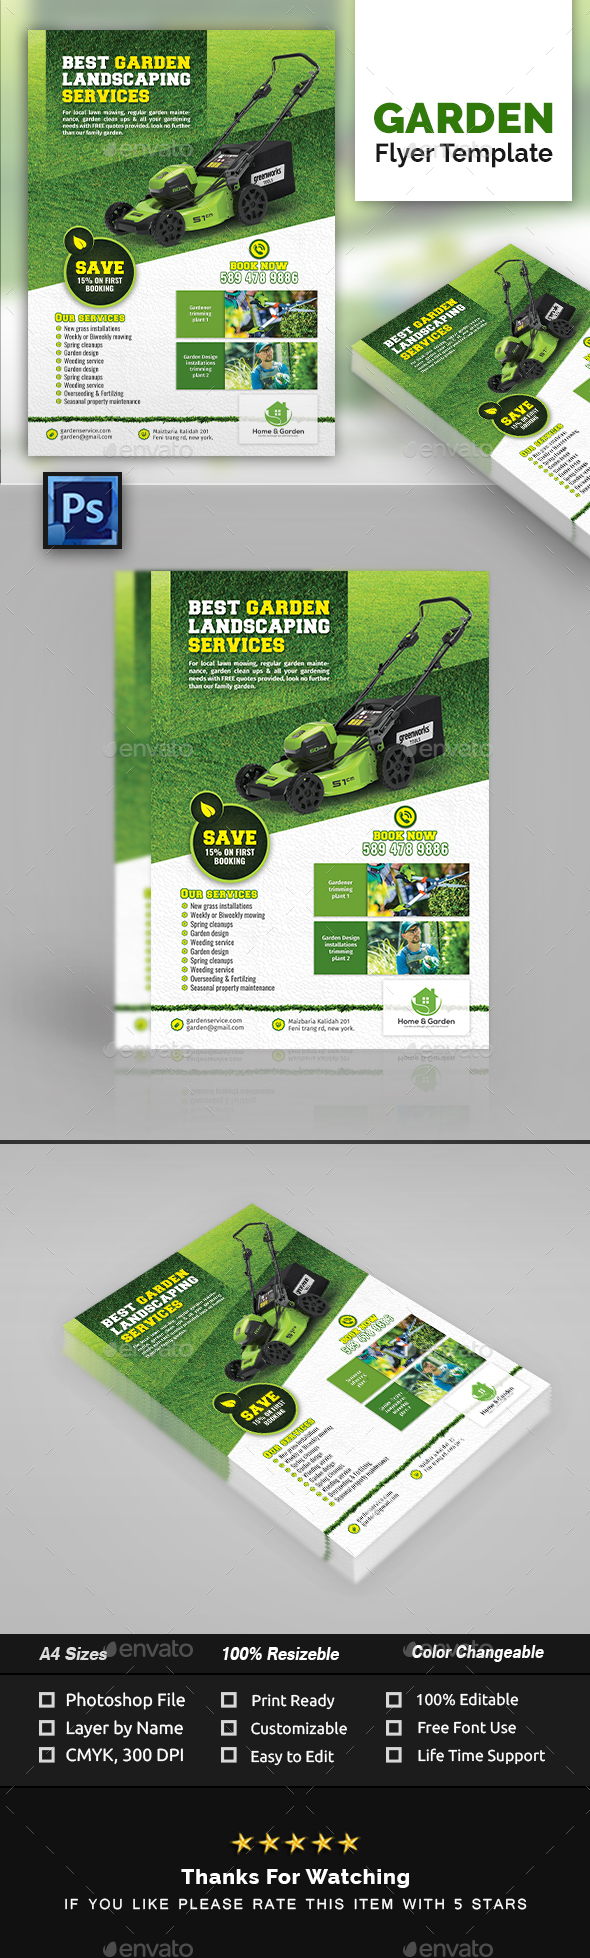 Landscape Flyer Template Free from previews.customer.envatousercontent.com